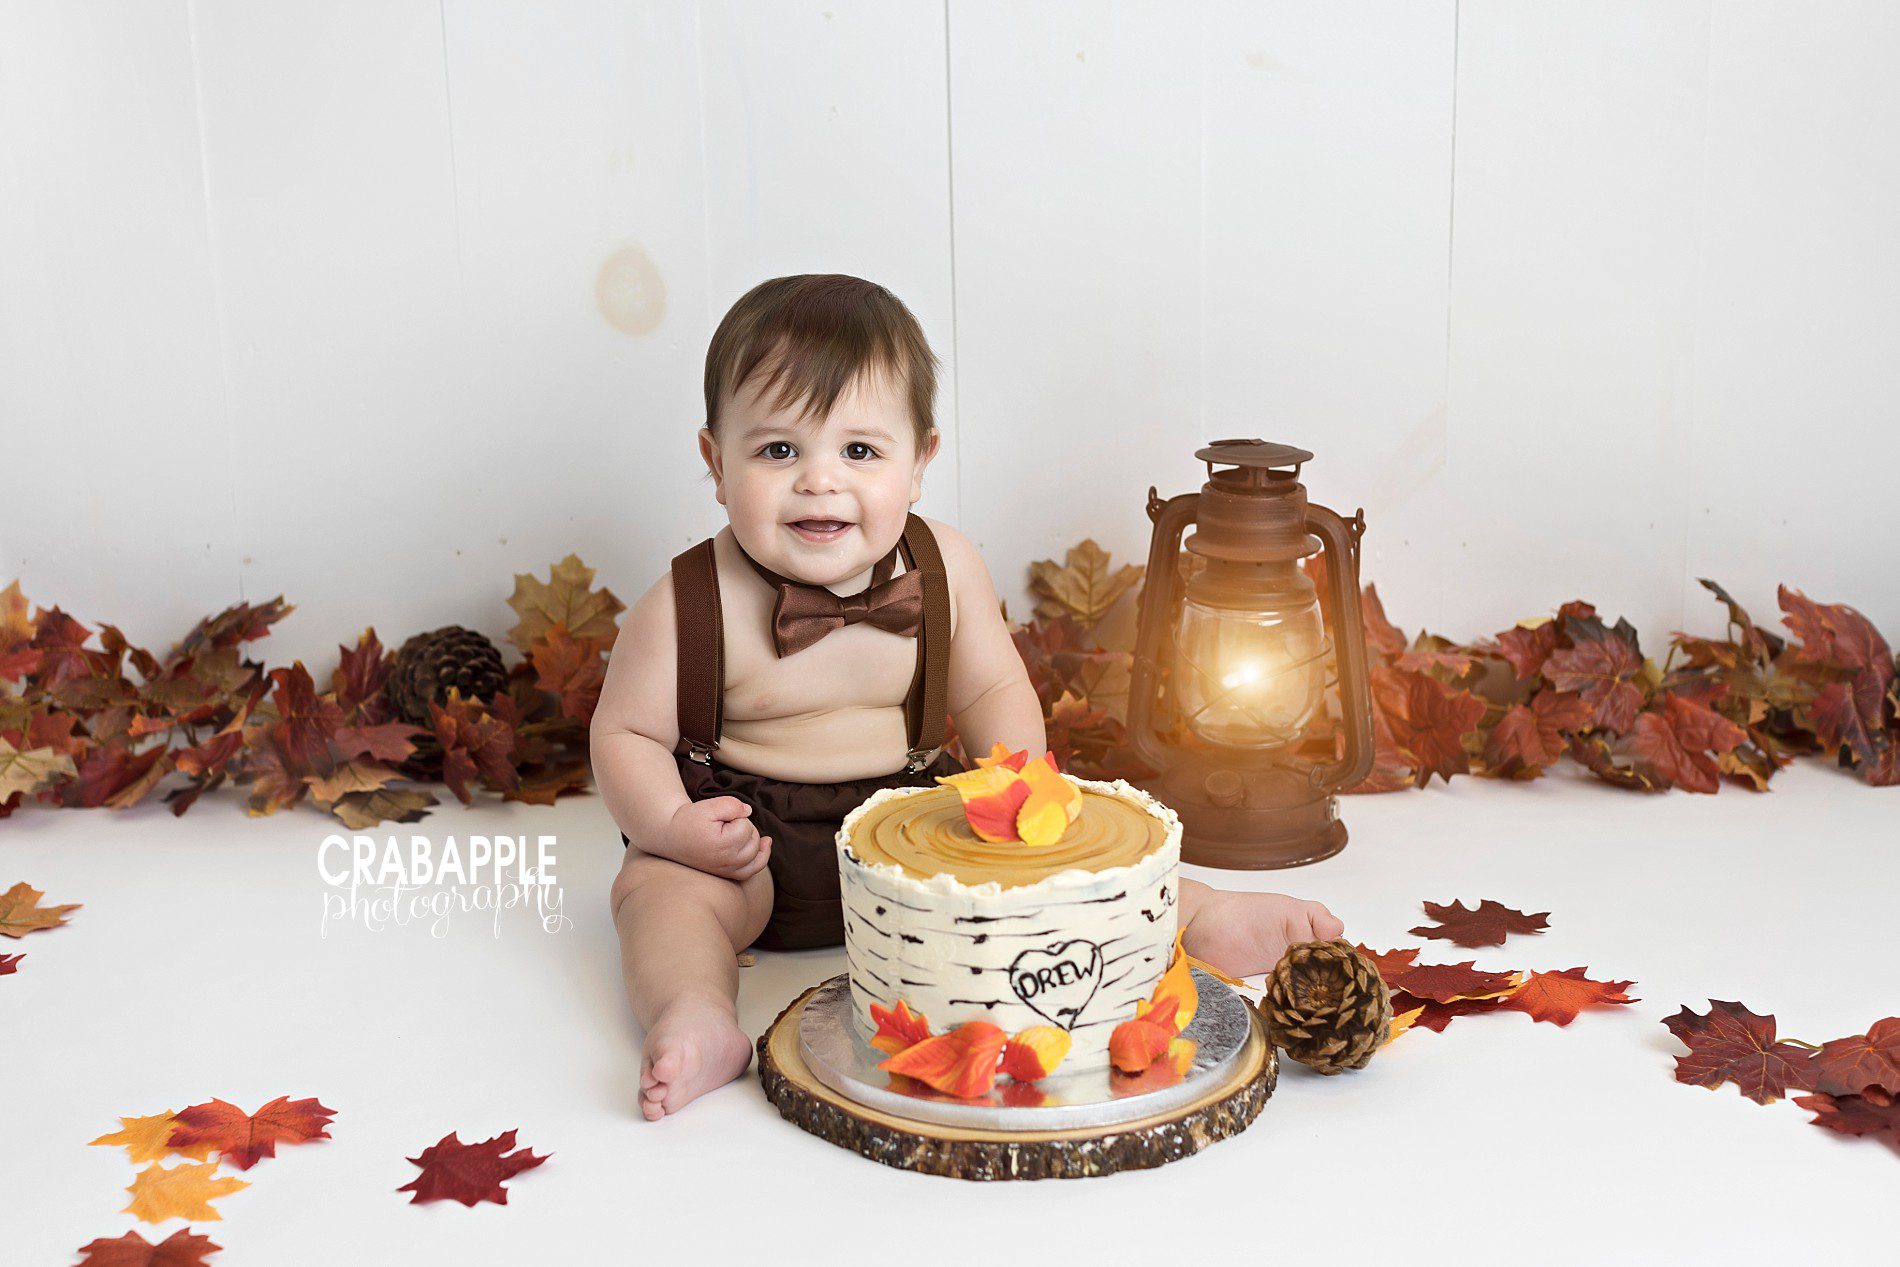 Fall themed cake smash photos using leaves, pinecones, and a tree themed cake.